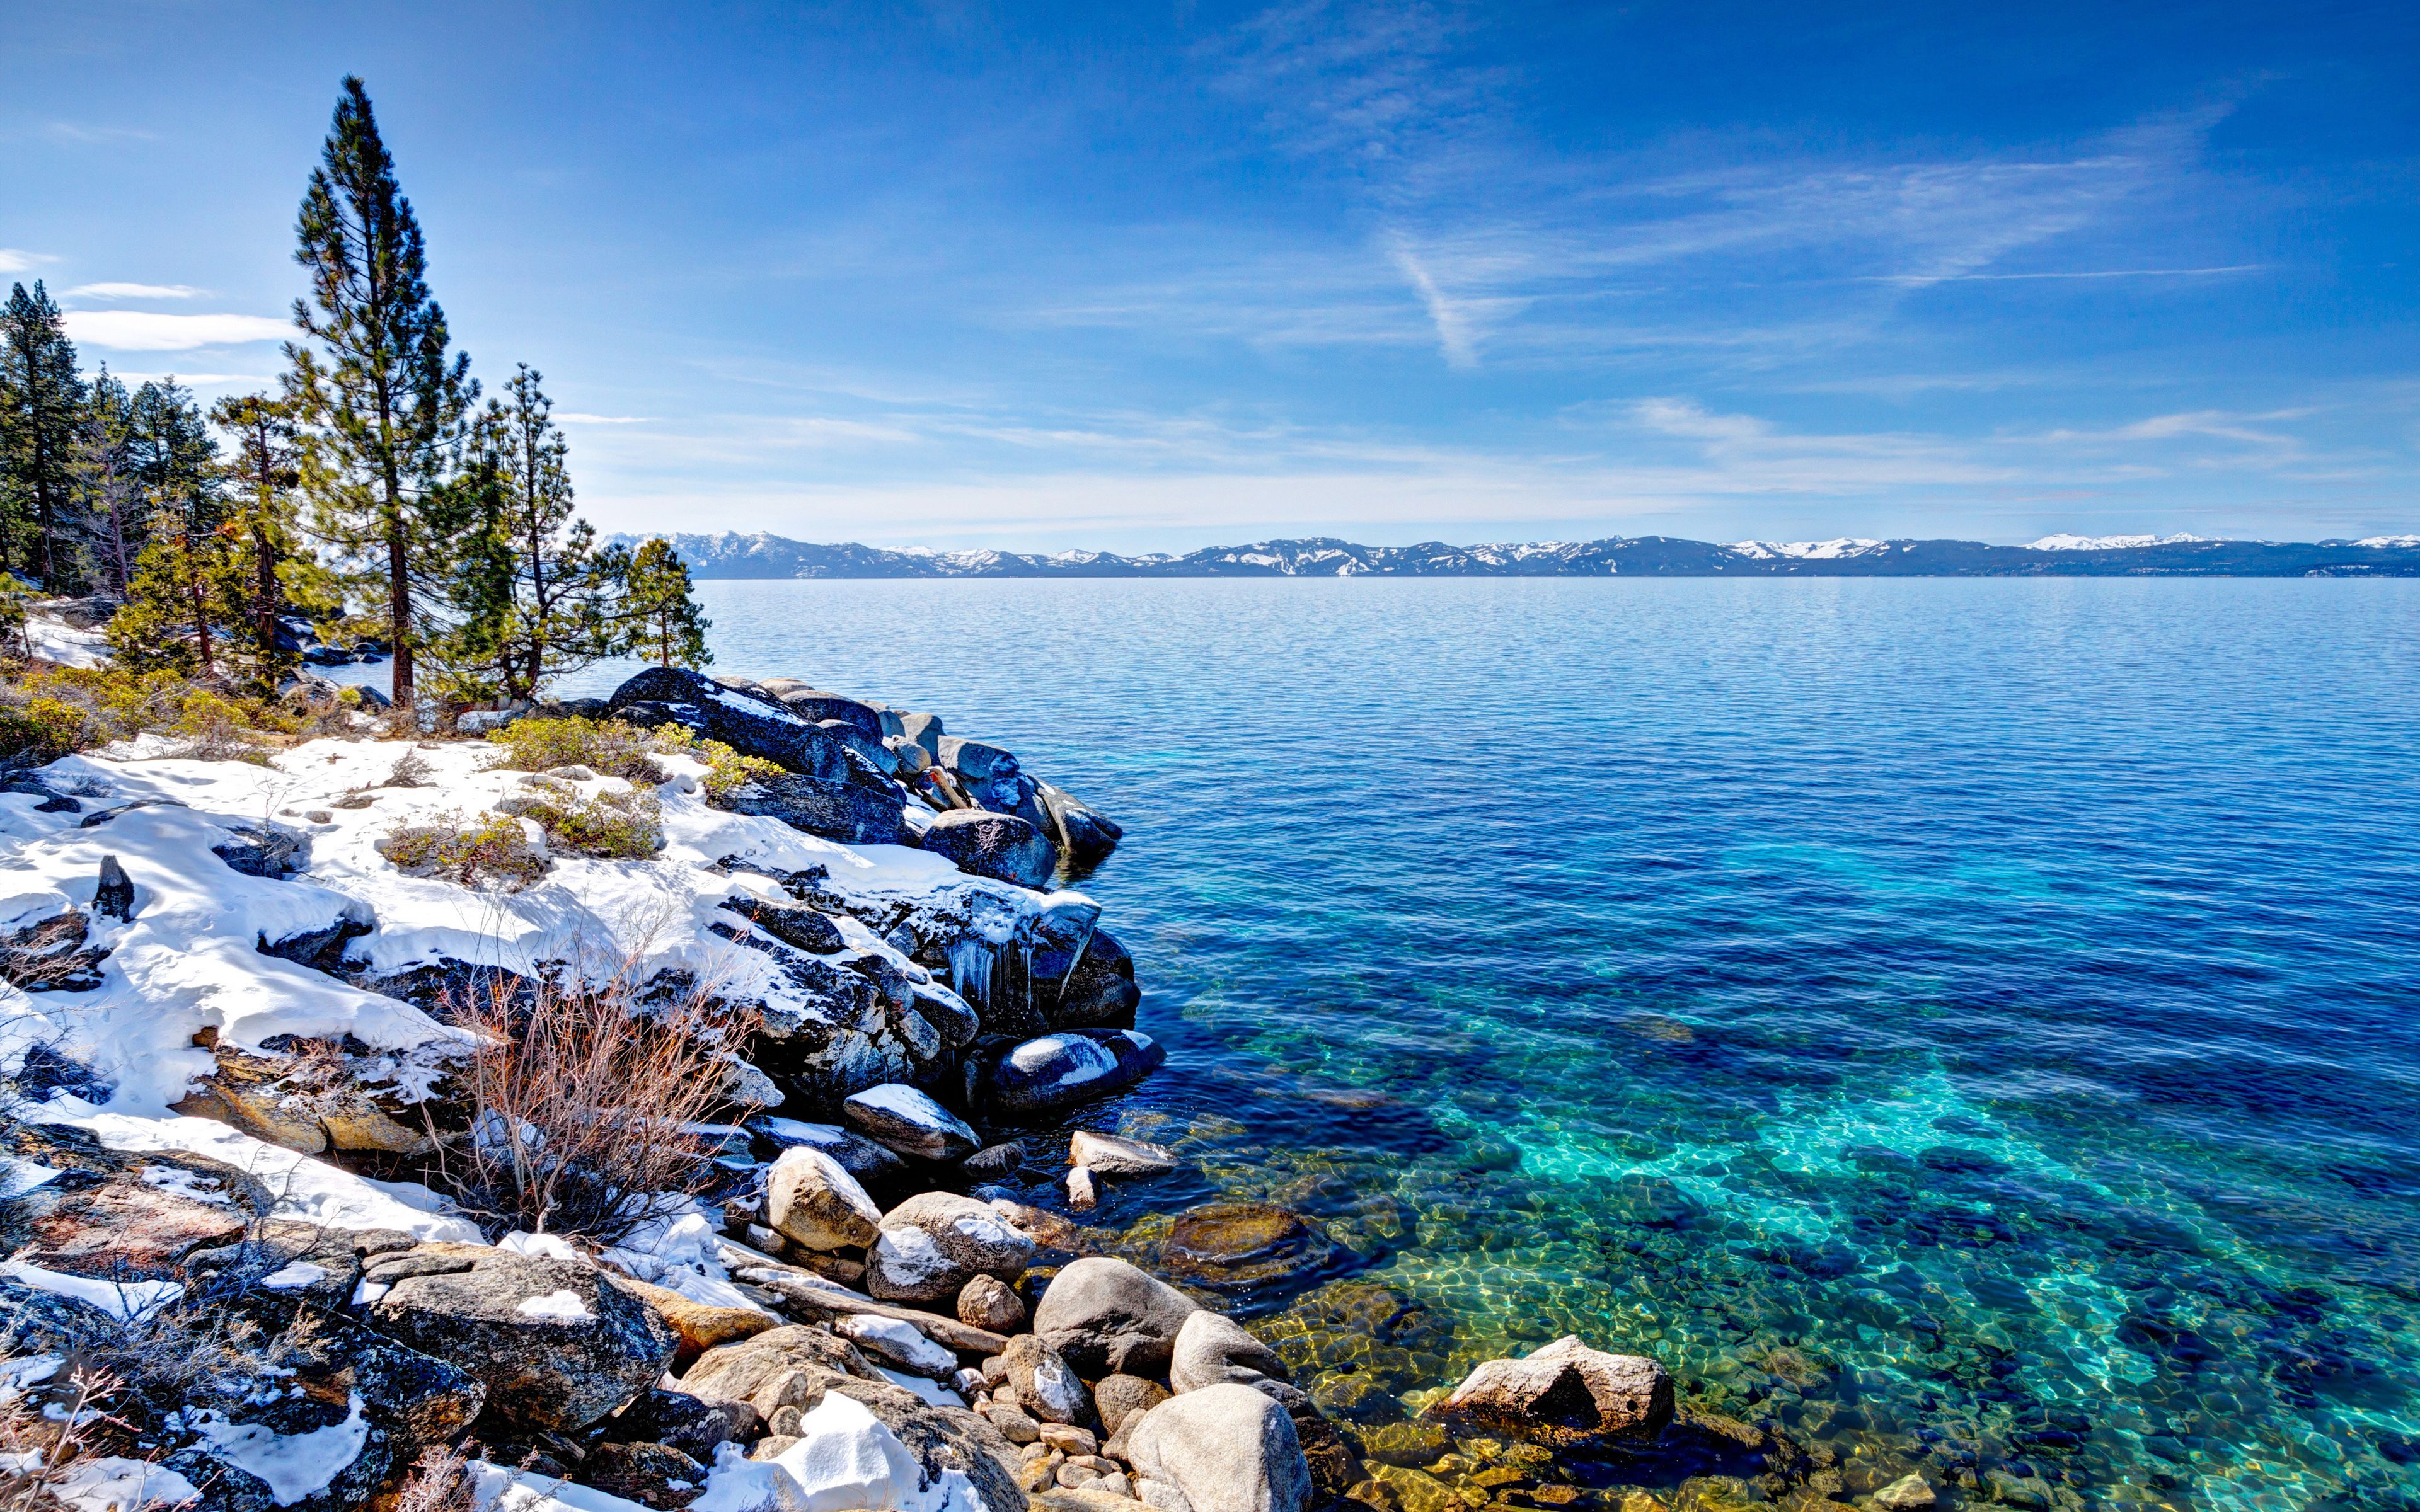 Download wallpaper Lake Tahoe, 4k, mountain lake, winter, coast, Emerald Bay State Park, USA, California for desktop with resolution 3840x2400. High Quality HD picture wallpaper